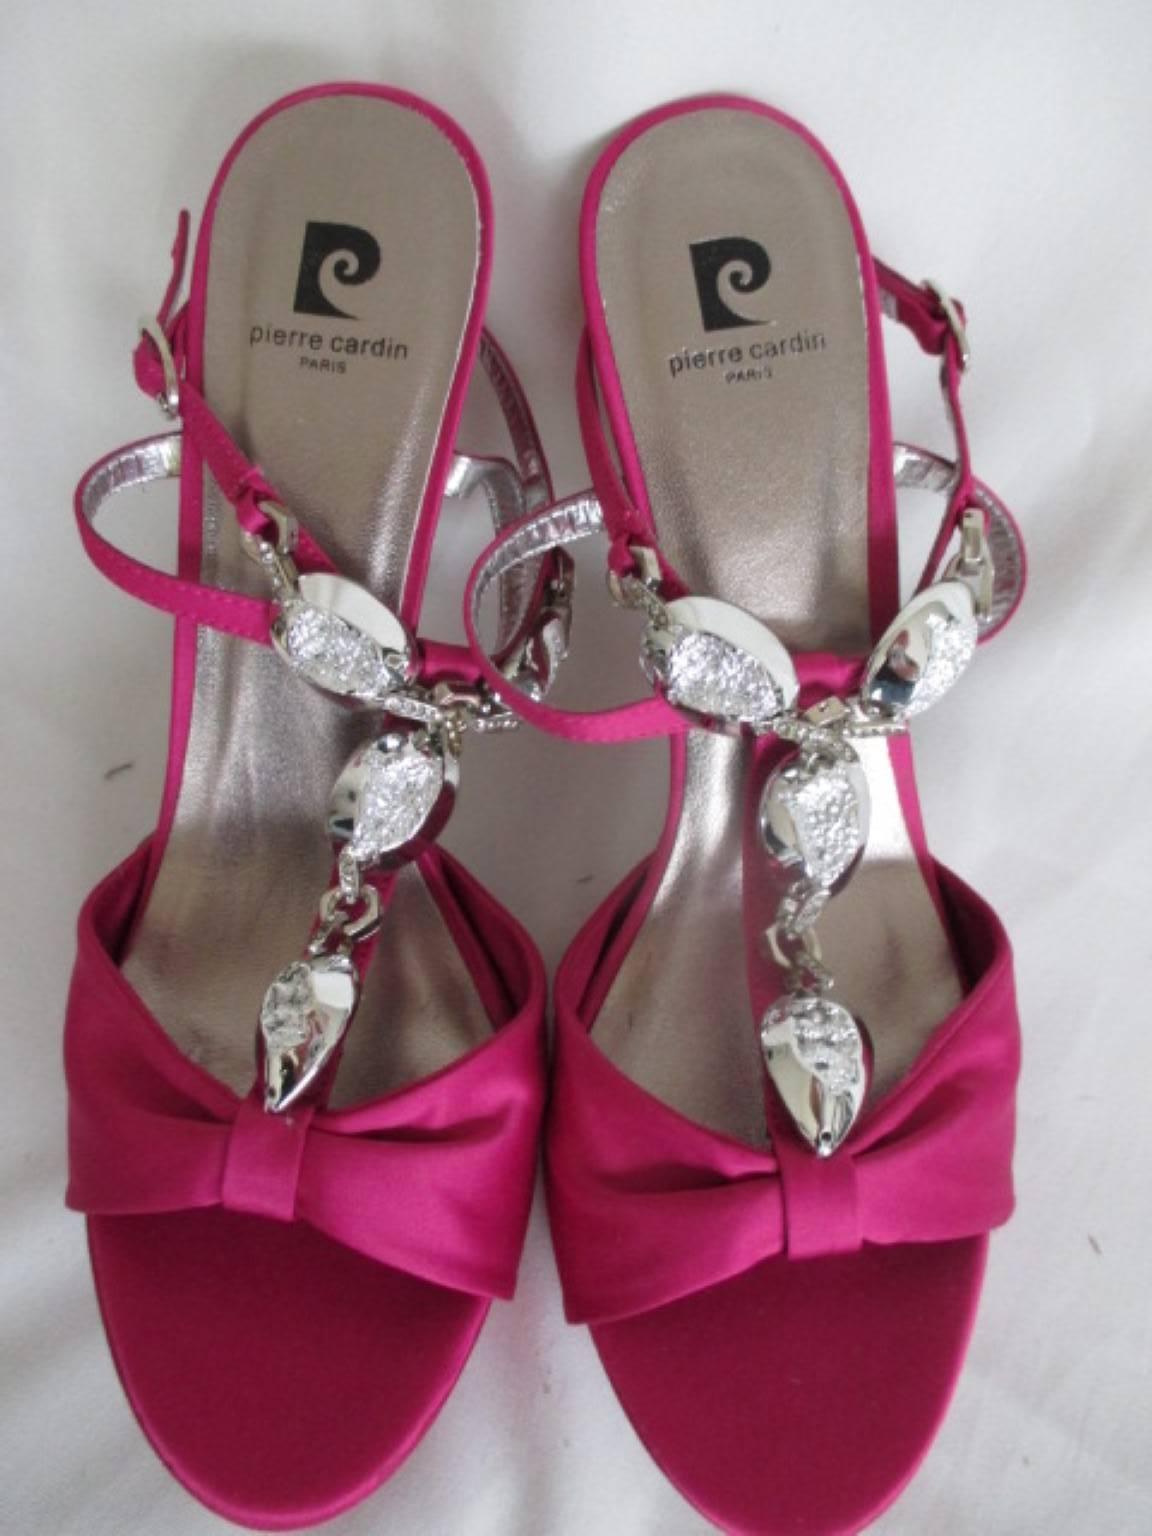 New in box, old stock, rare pierre cardin heels
The material is satin with silver color decorative stones
Its in excellent condition
Comes with the original box
size is EU 41/  US 10.5 /  UK 8.5
We offer also this item in blue with same size